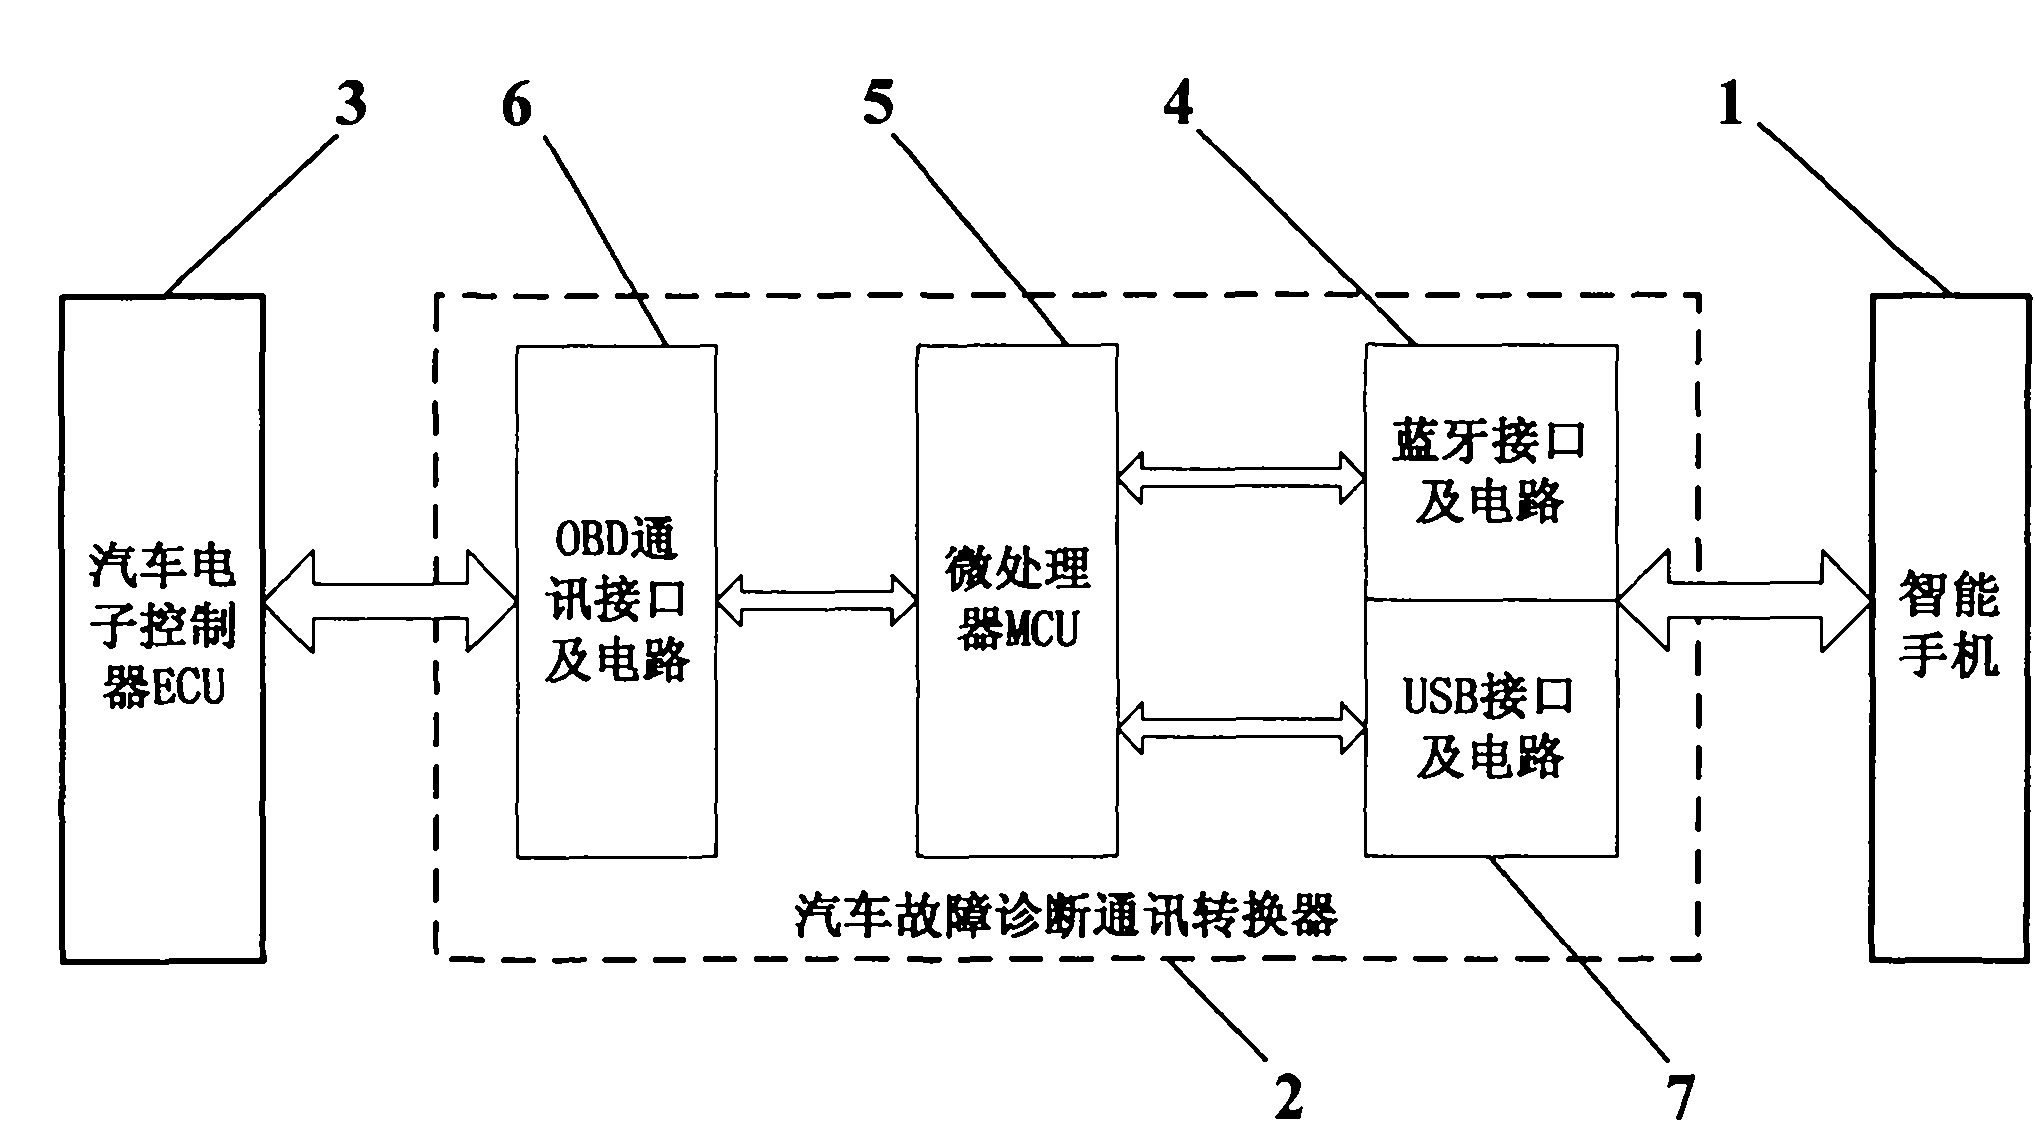 Vehicle failure detection method and device based on smart phone